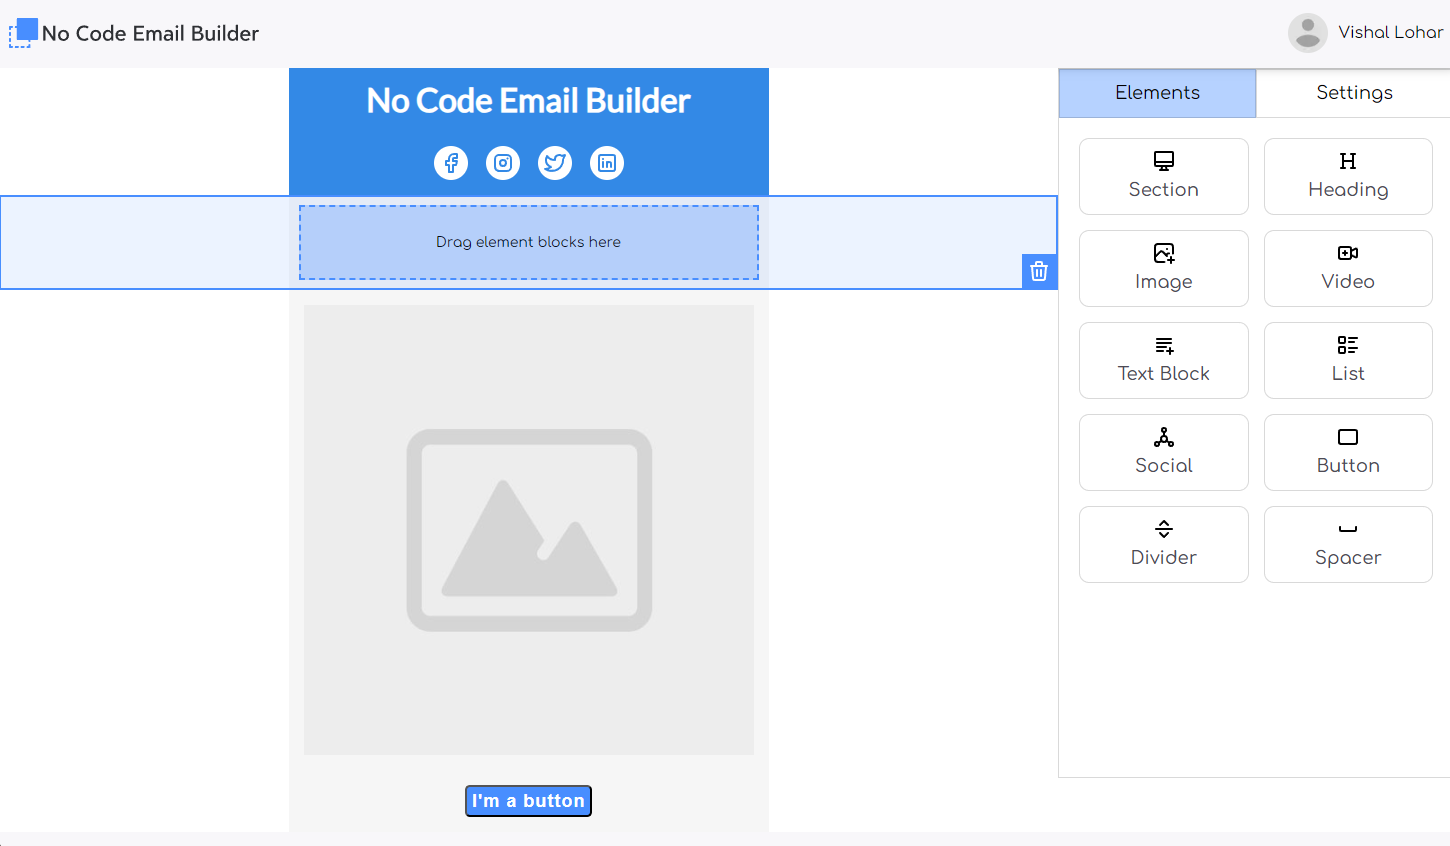 No Code Email Builder